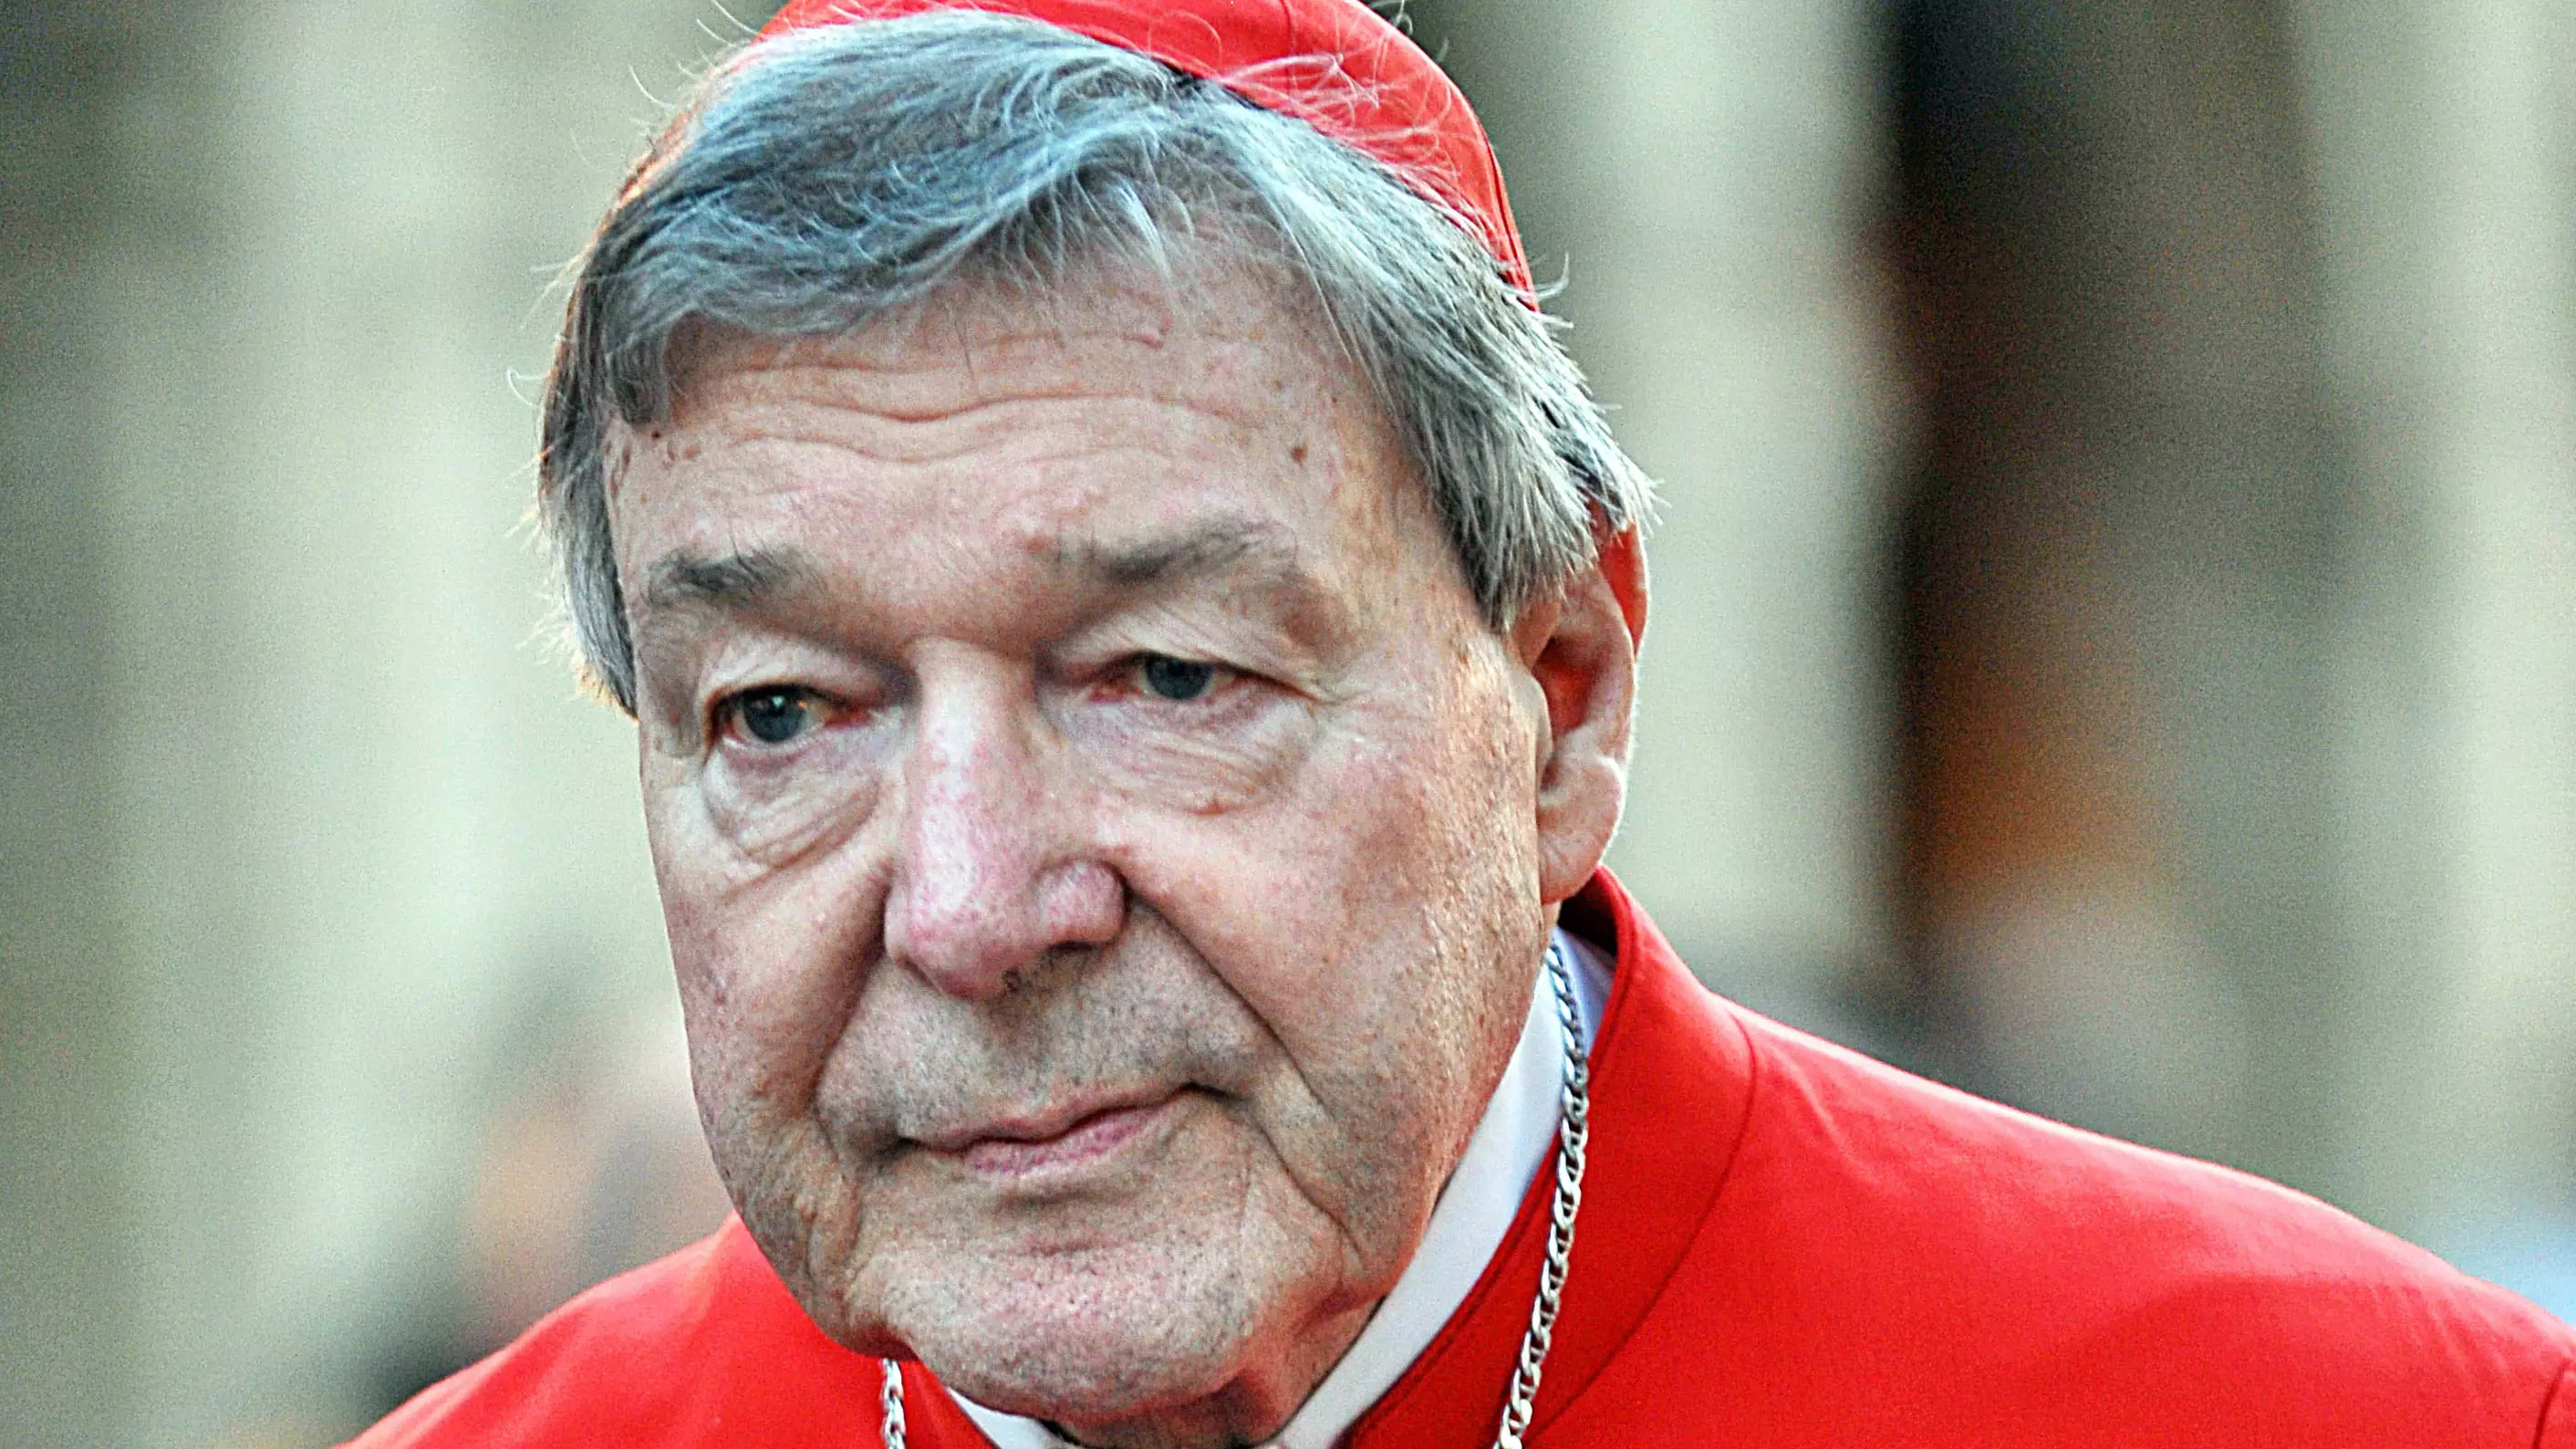 People Are Calling For Mandatory Minimums For Paedophiles After George Pell’s Sentence